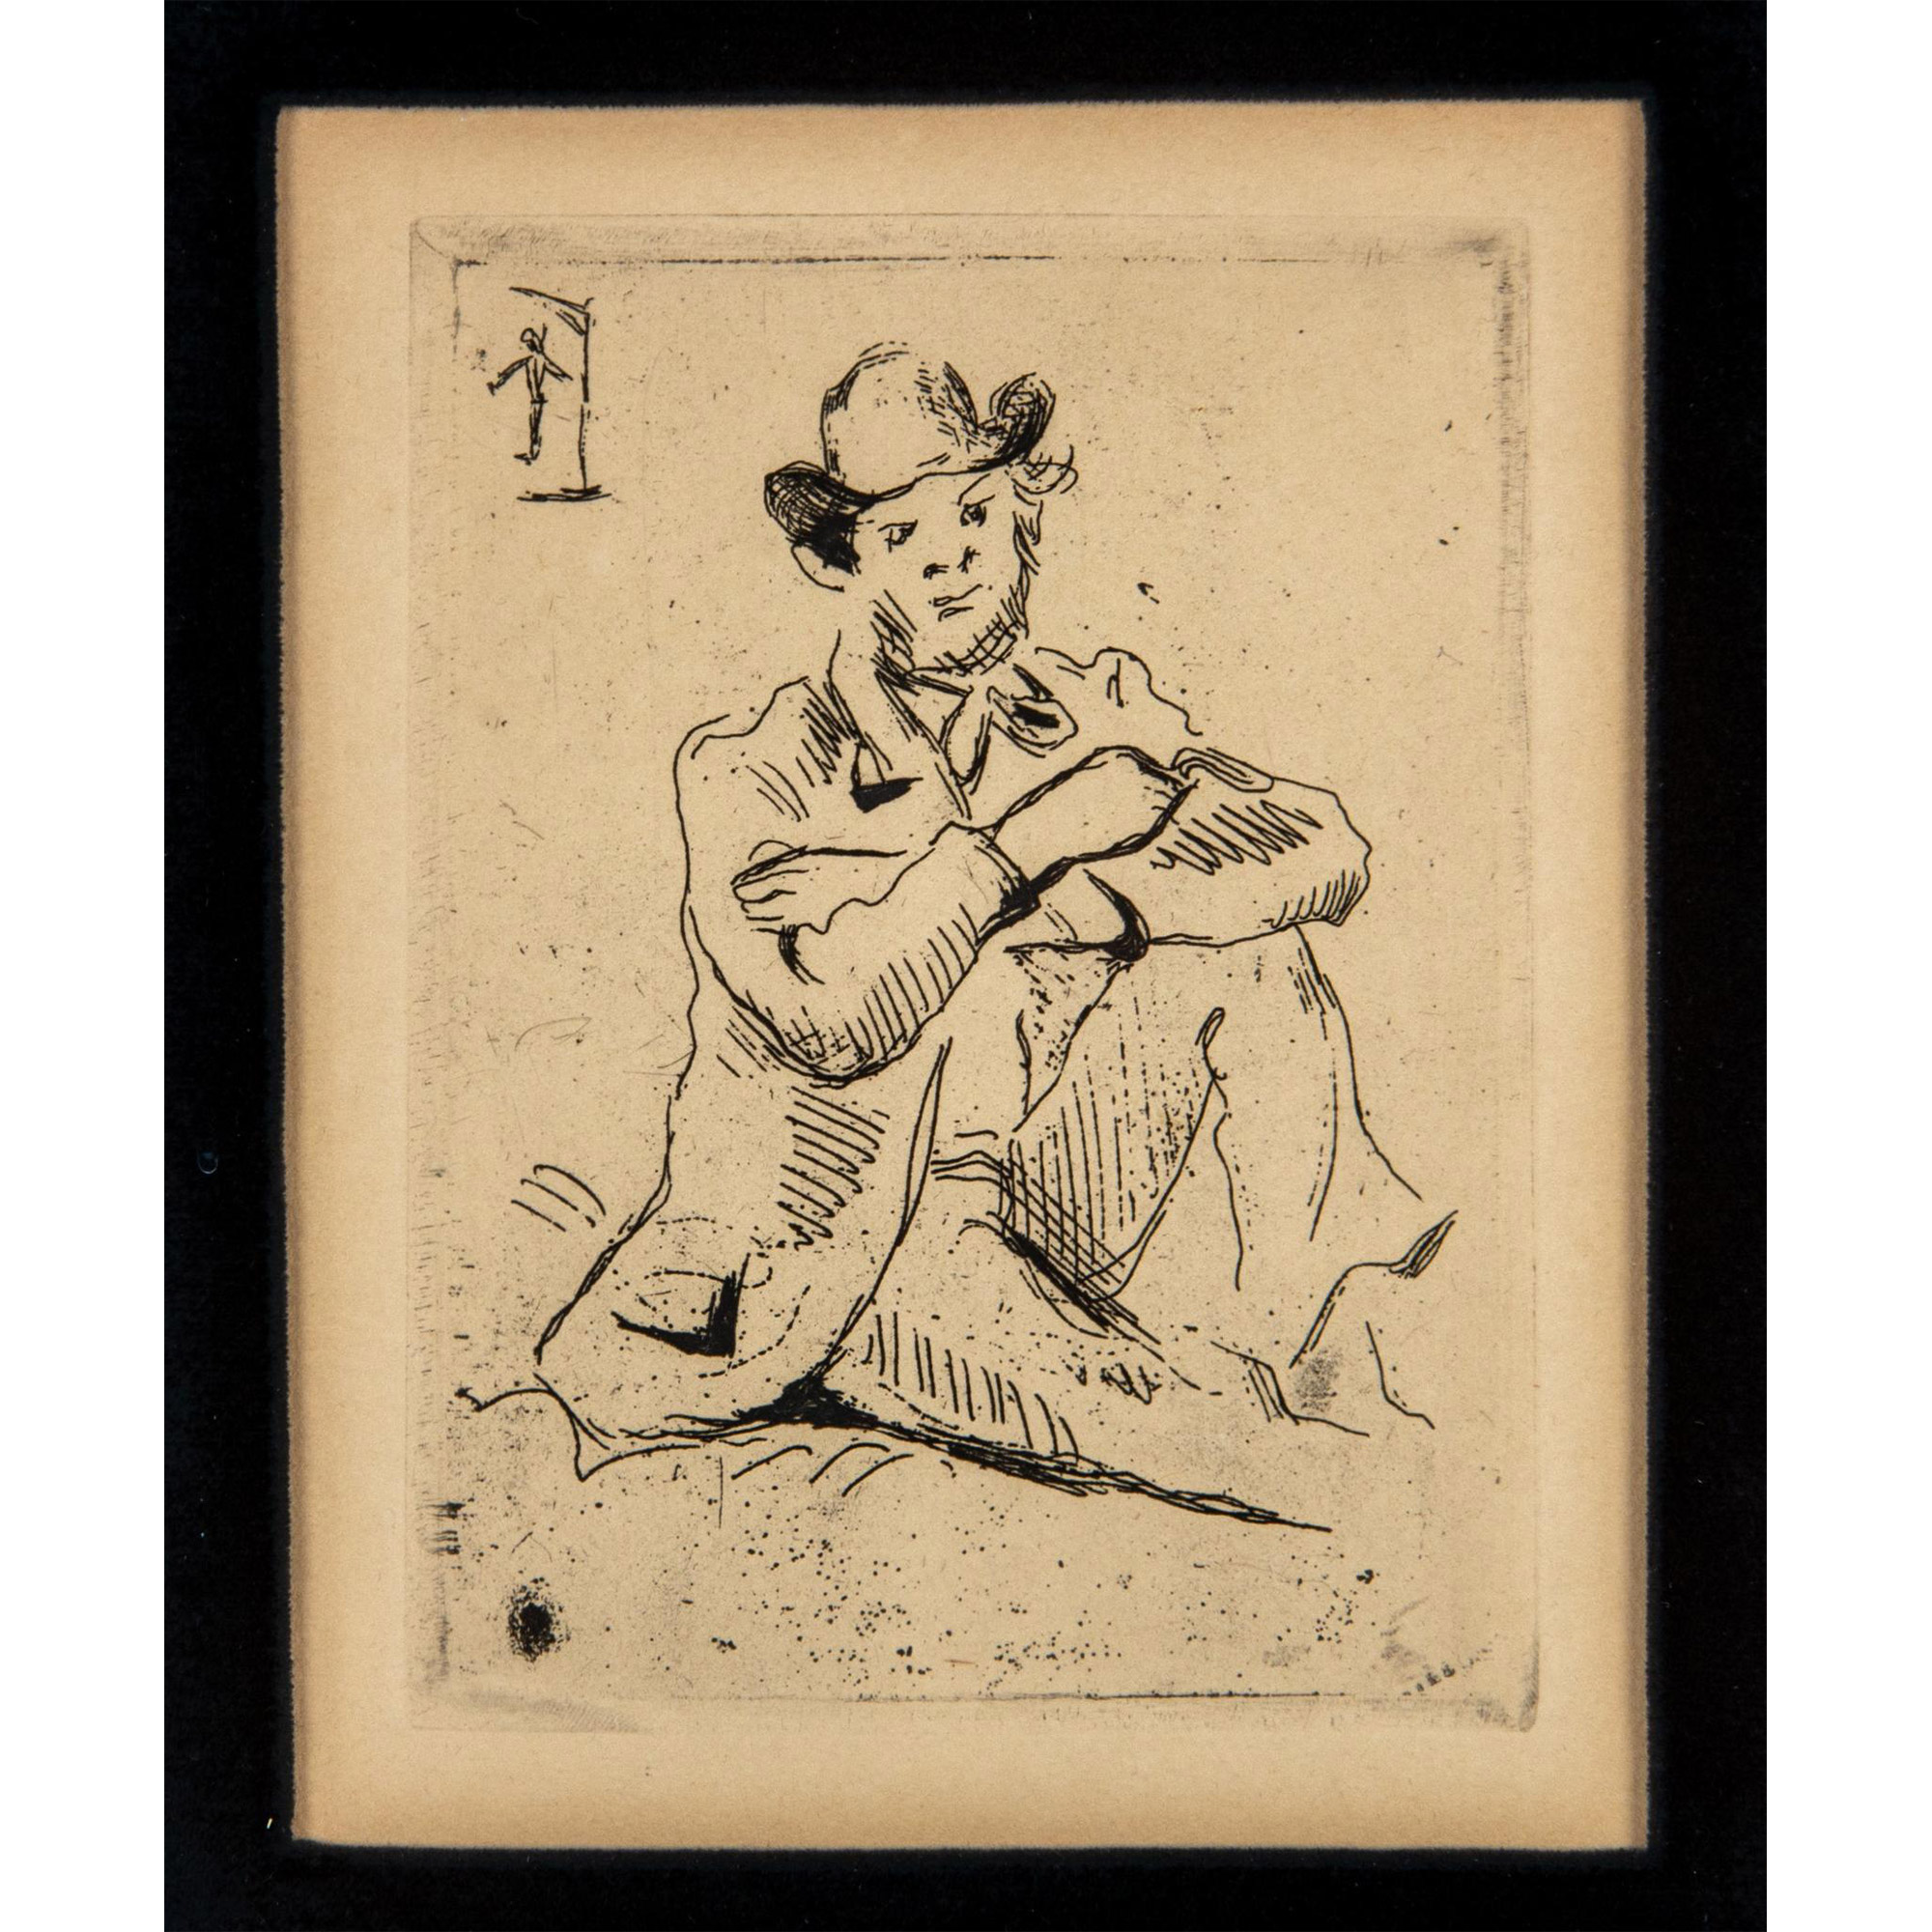 Paul Cezanne (Aft.) Drypoint Etching on Cream Paper - Image 3 of 5